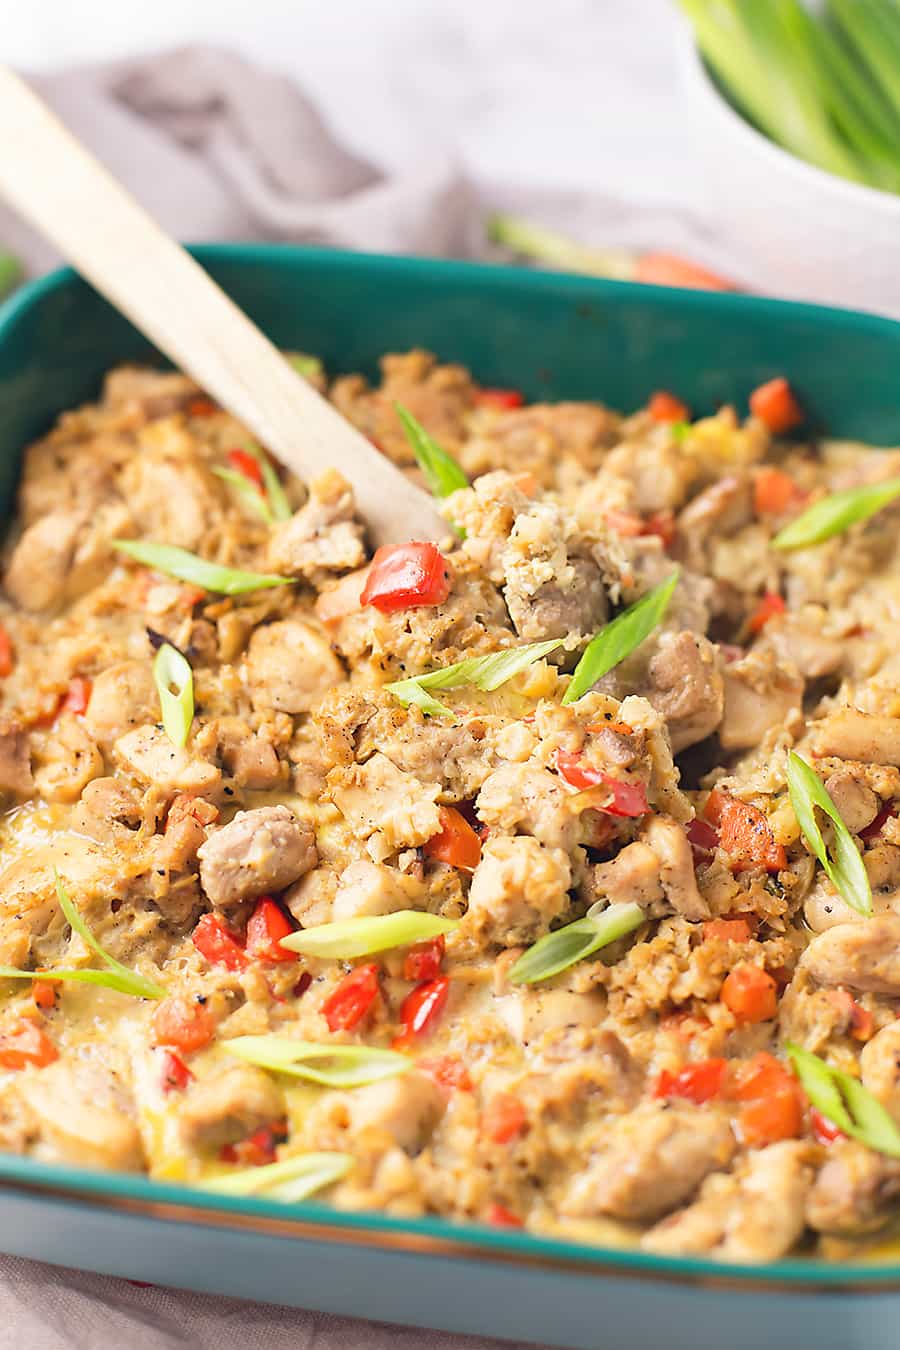 This chicken cauliflower fried rice casserole is like comfort Chinese food but without all of the carbs! This casserole is full of veggies but your kids will never know that it is cauliflower instead of white rice! Feel free to fill your plate with this low carb chicken cauliflower fried rice casserole